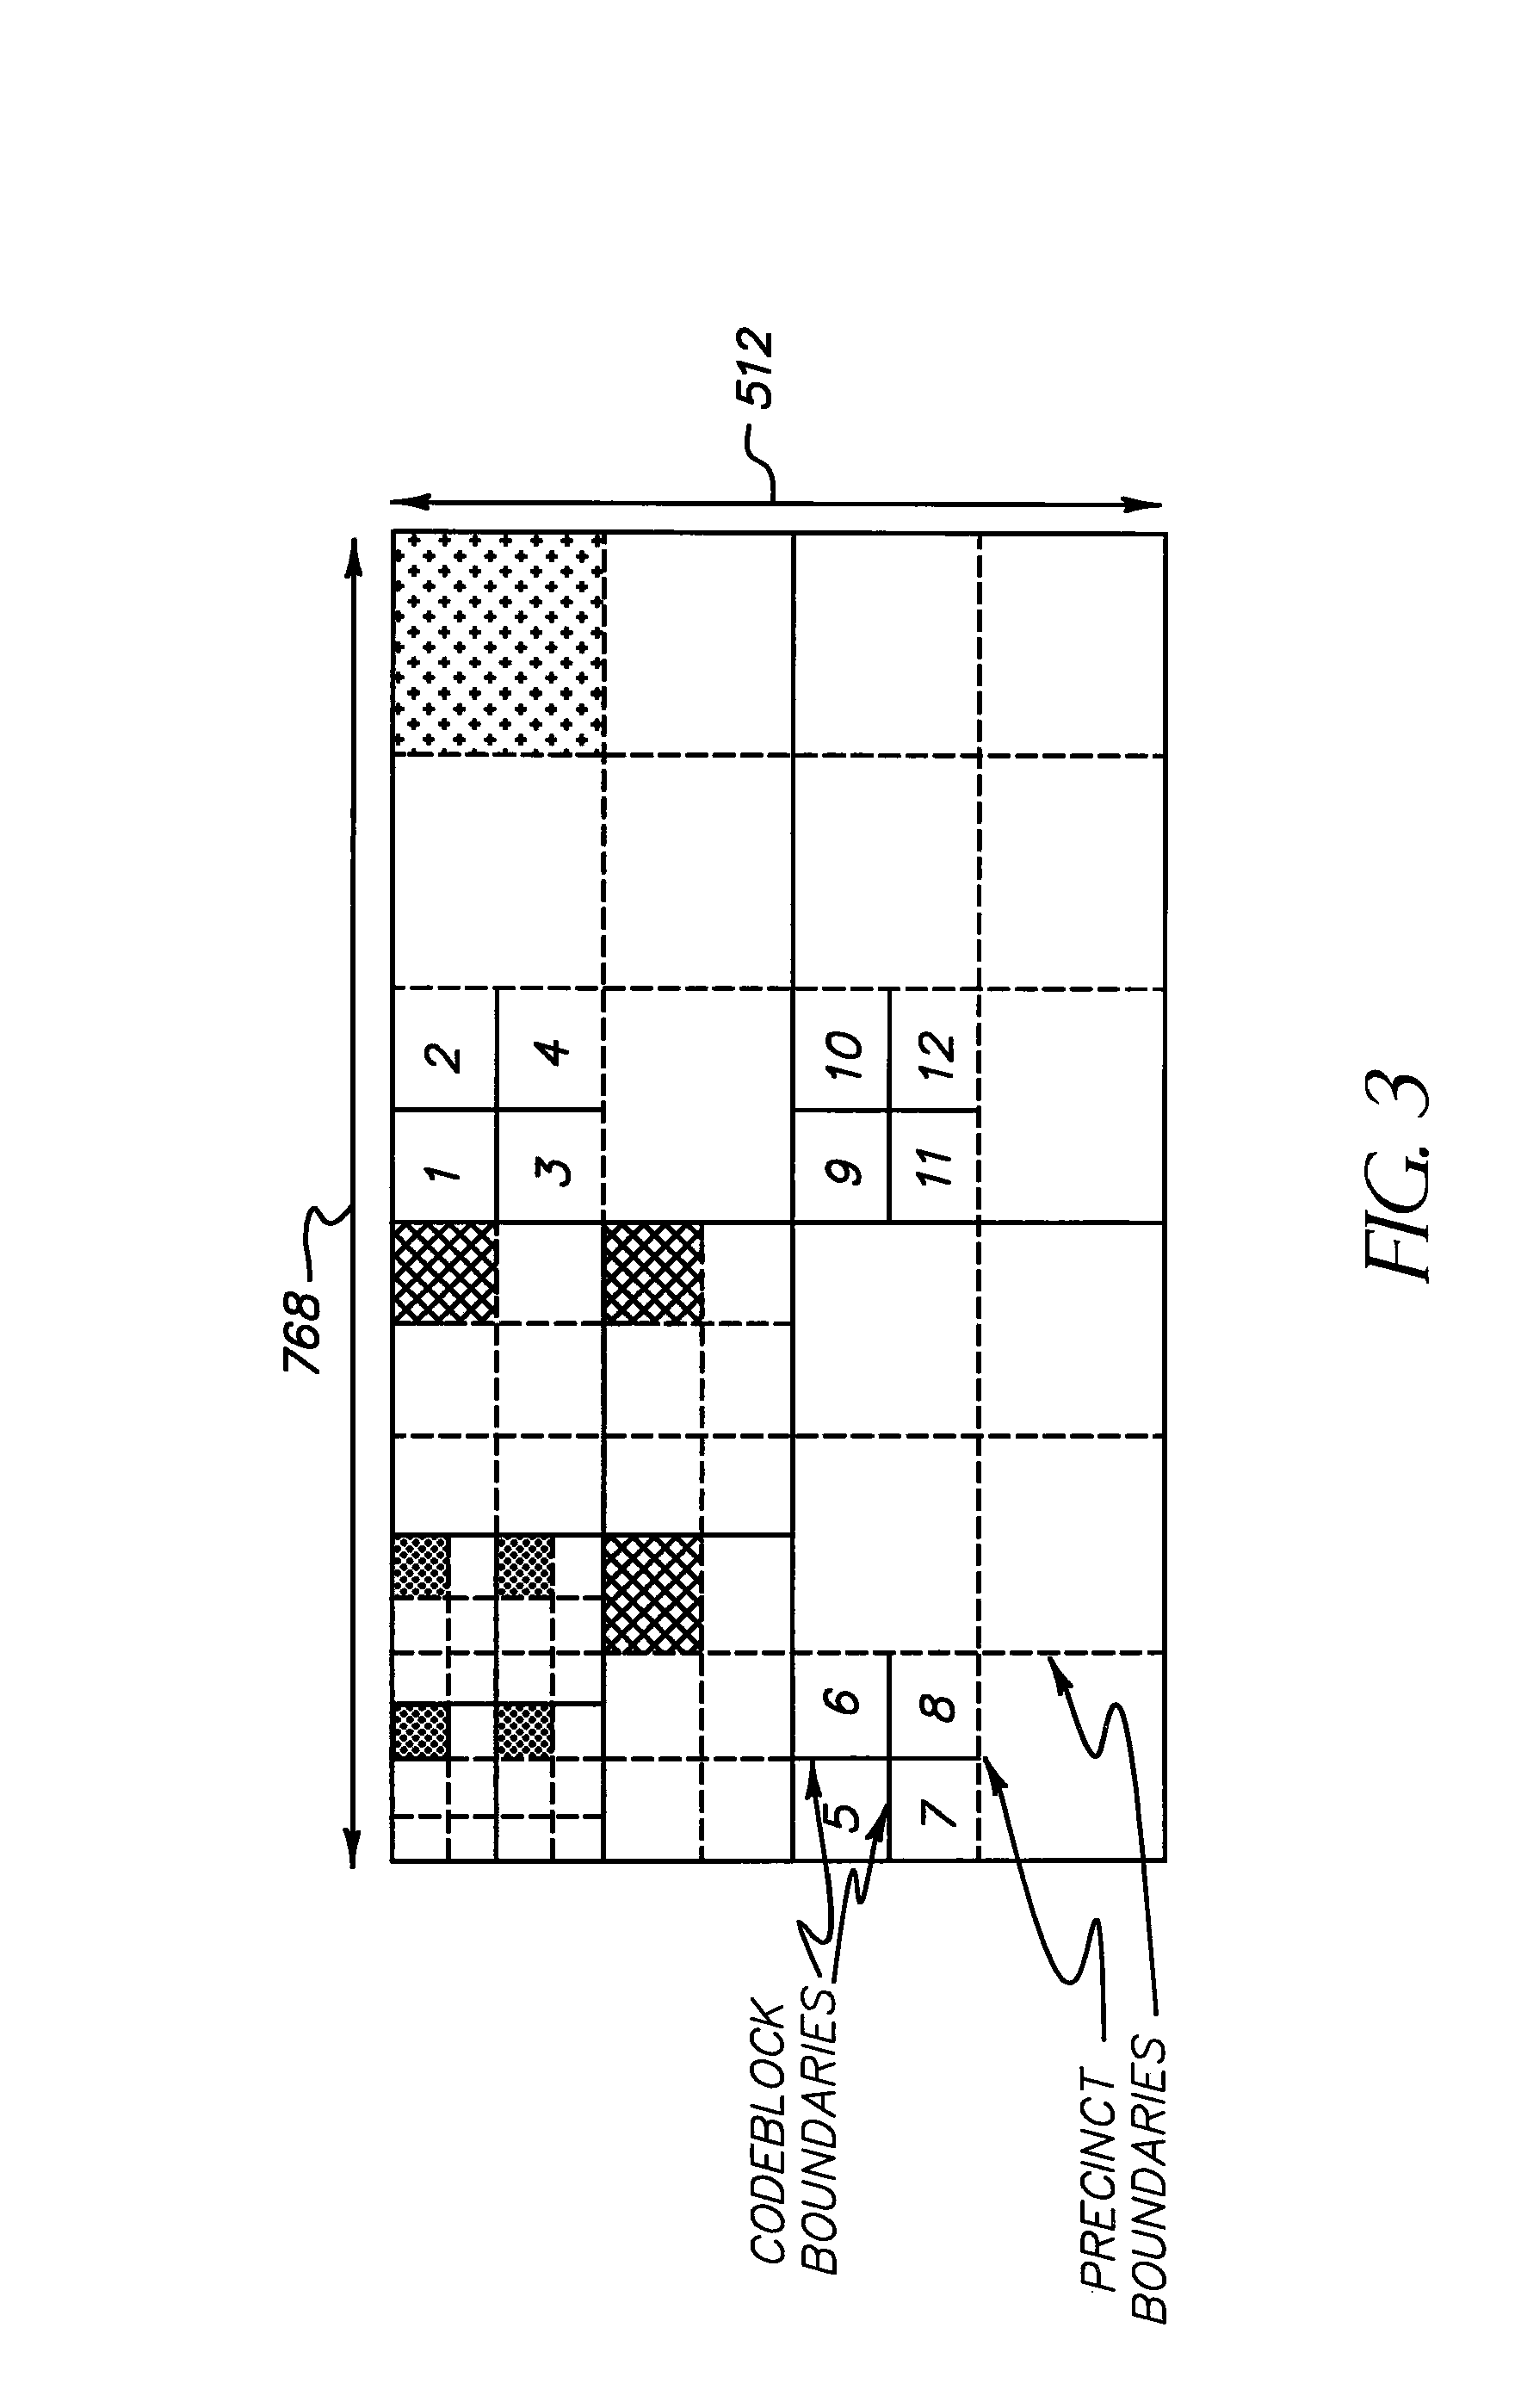 System and method for rendering an oblique slice through volumetric data accessed via a client-server architecture